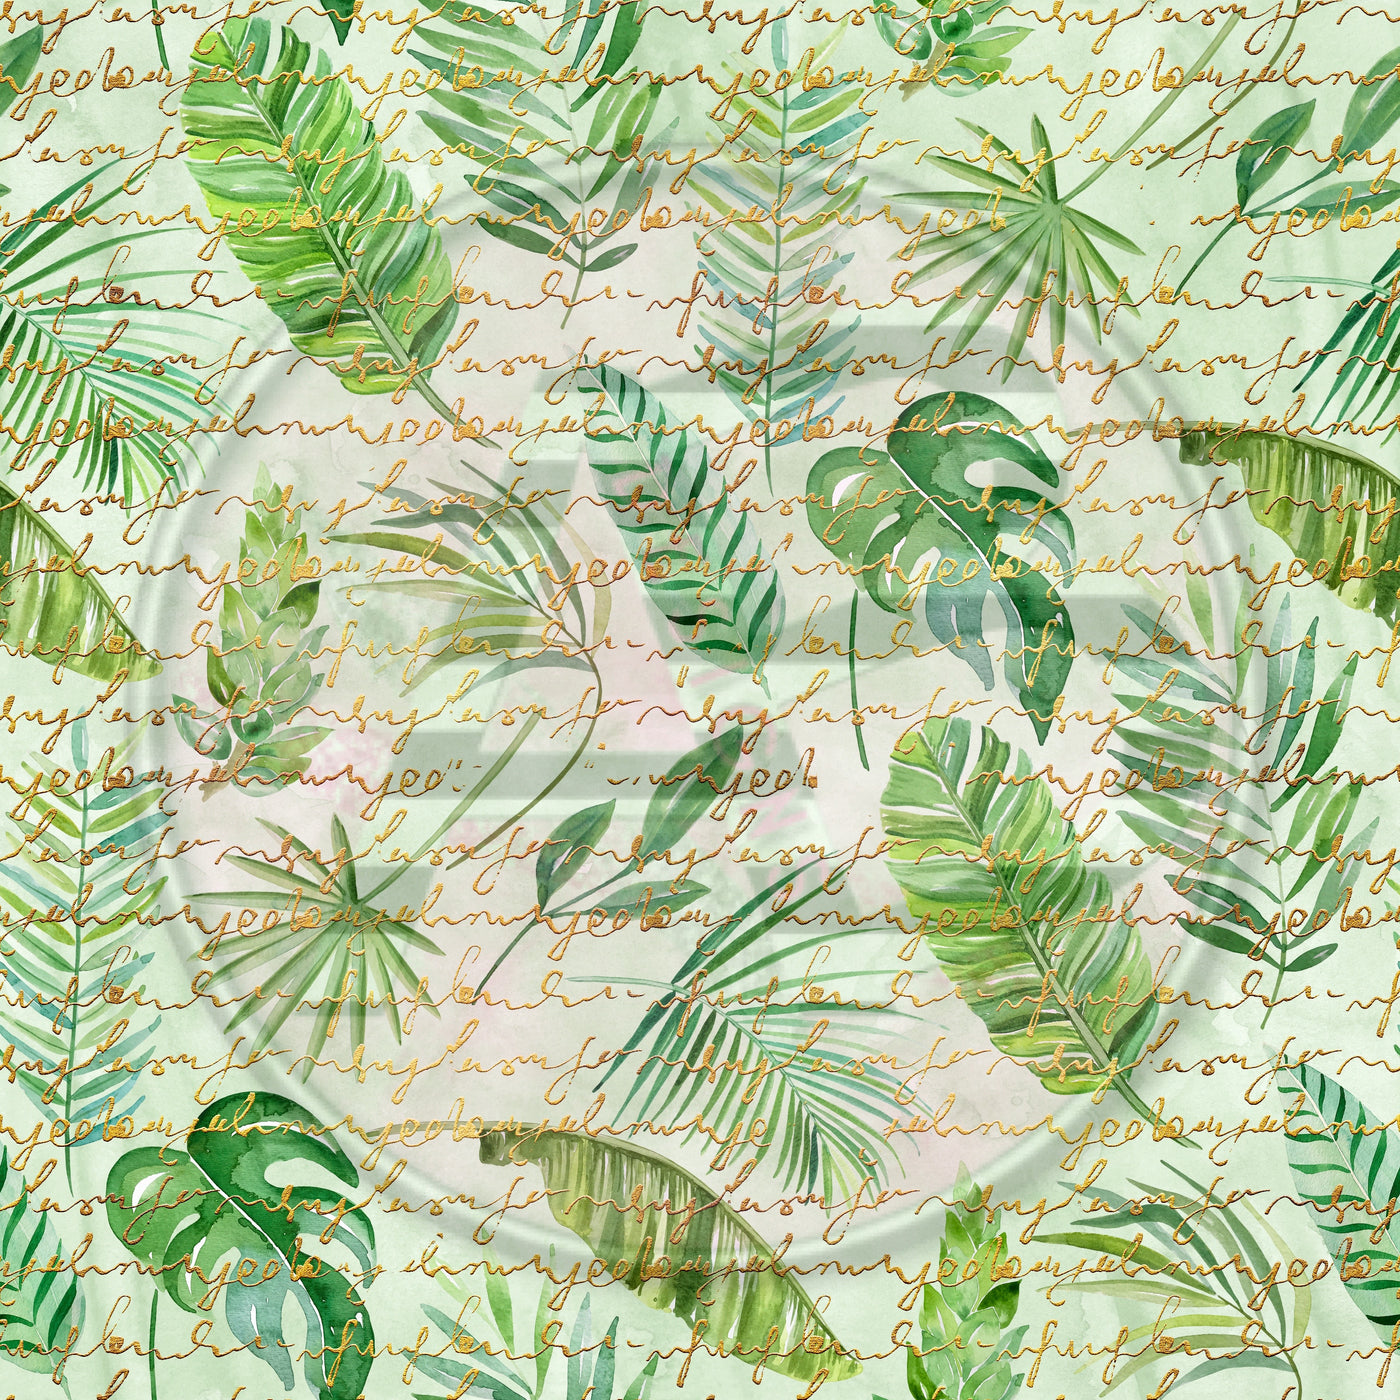 Adhesive Patterned Vinyl - Tropical 1169